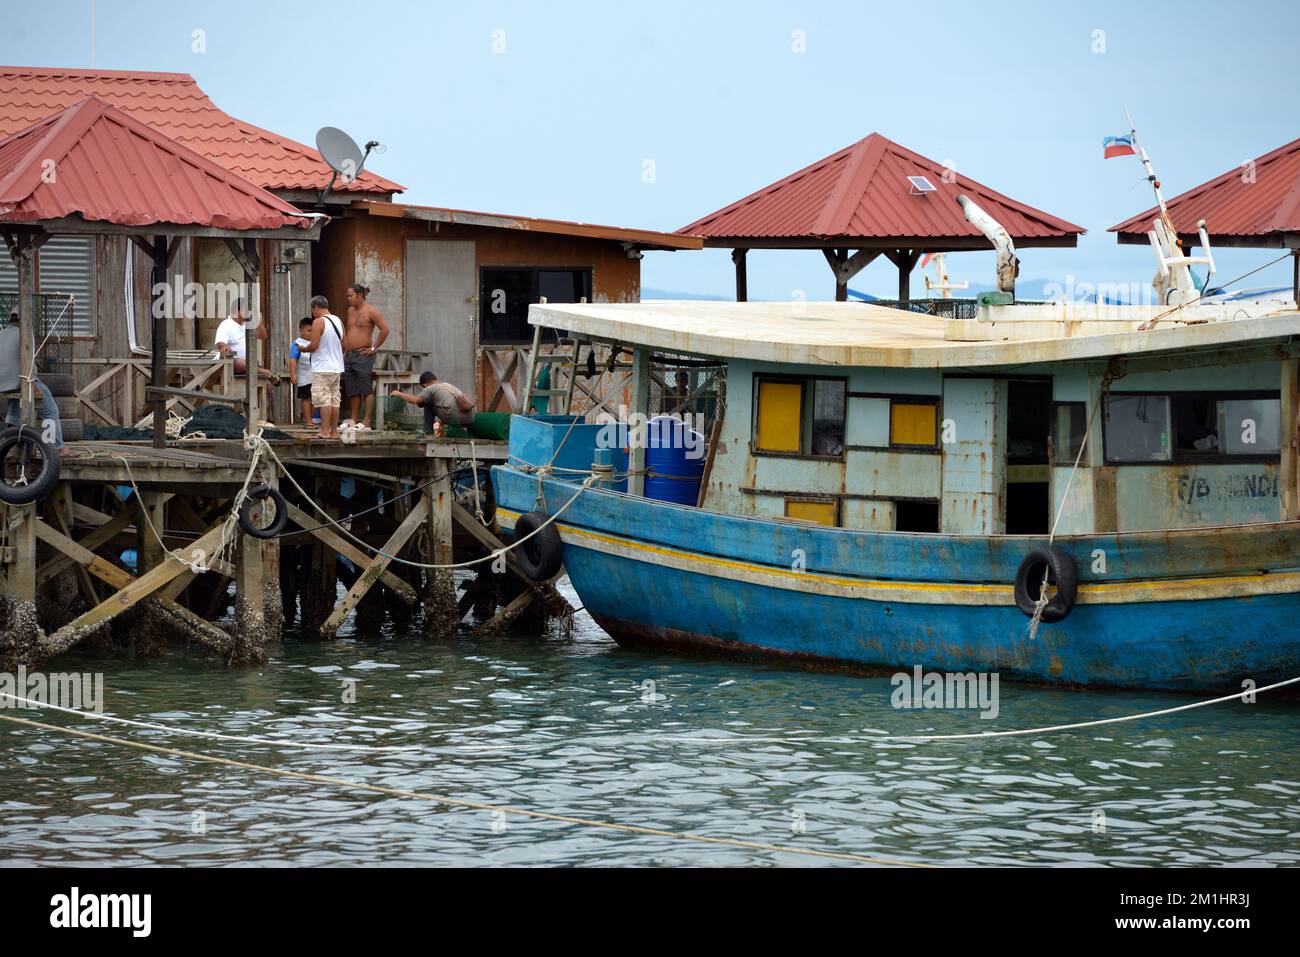 A fishing boat moored in the harbour in Kudat, Sabah, Borneo, Malaysia. Stock Photo